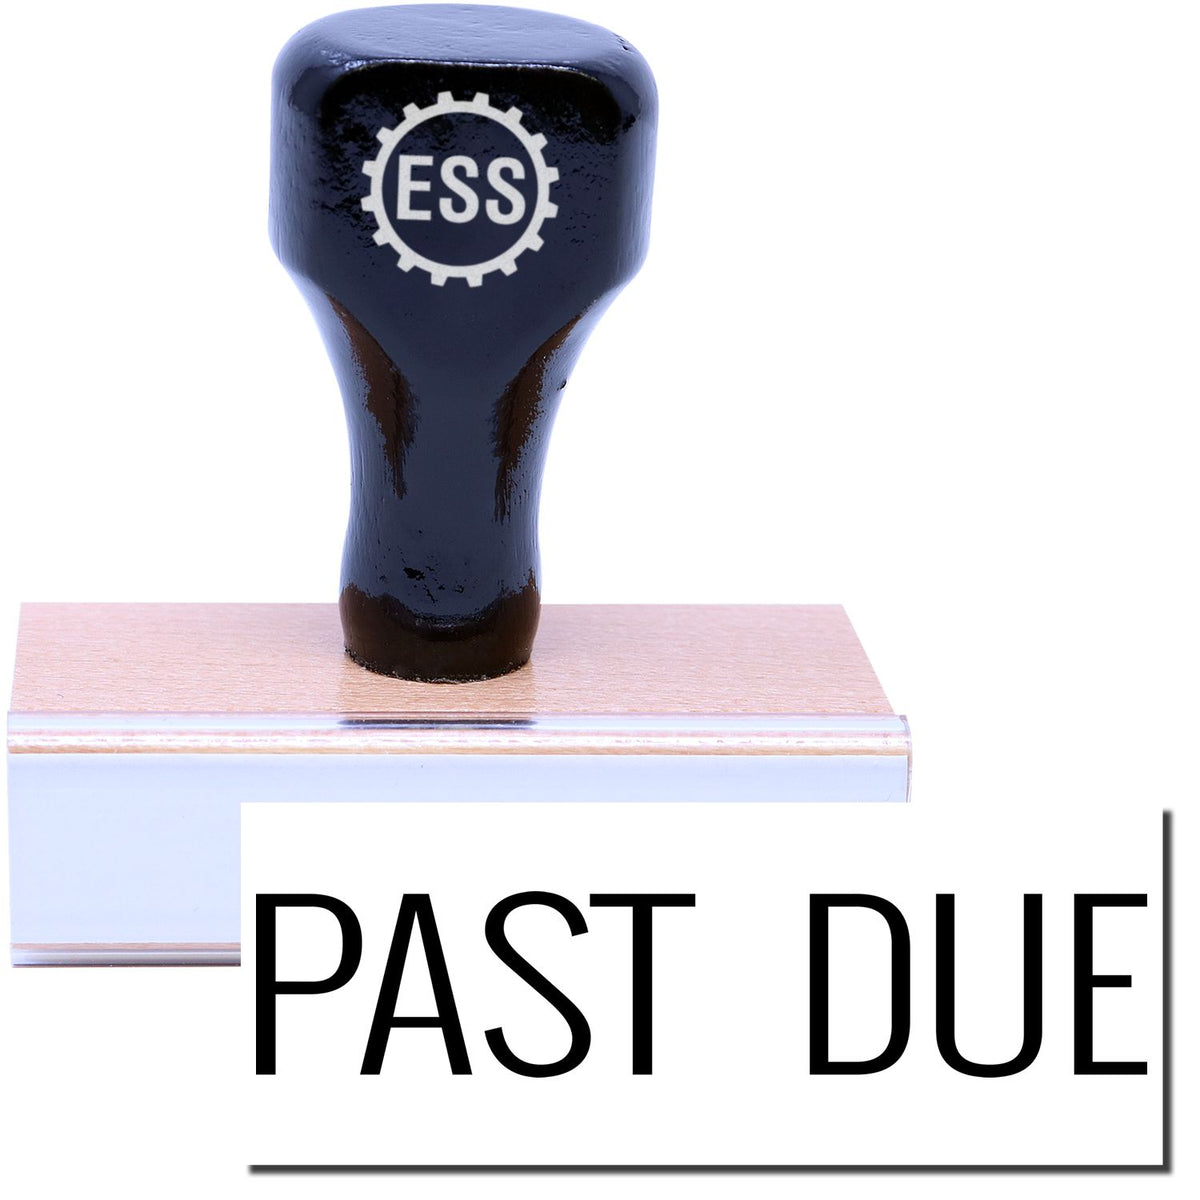 A stock office rubber stamp with a stamped image showing how the text &quot;PAST DUE&quot; in a narrow font is displayed after stamping.